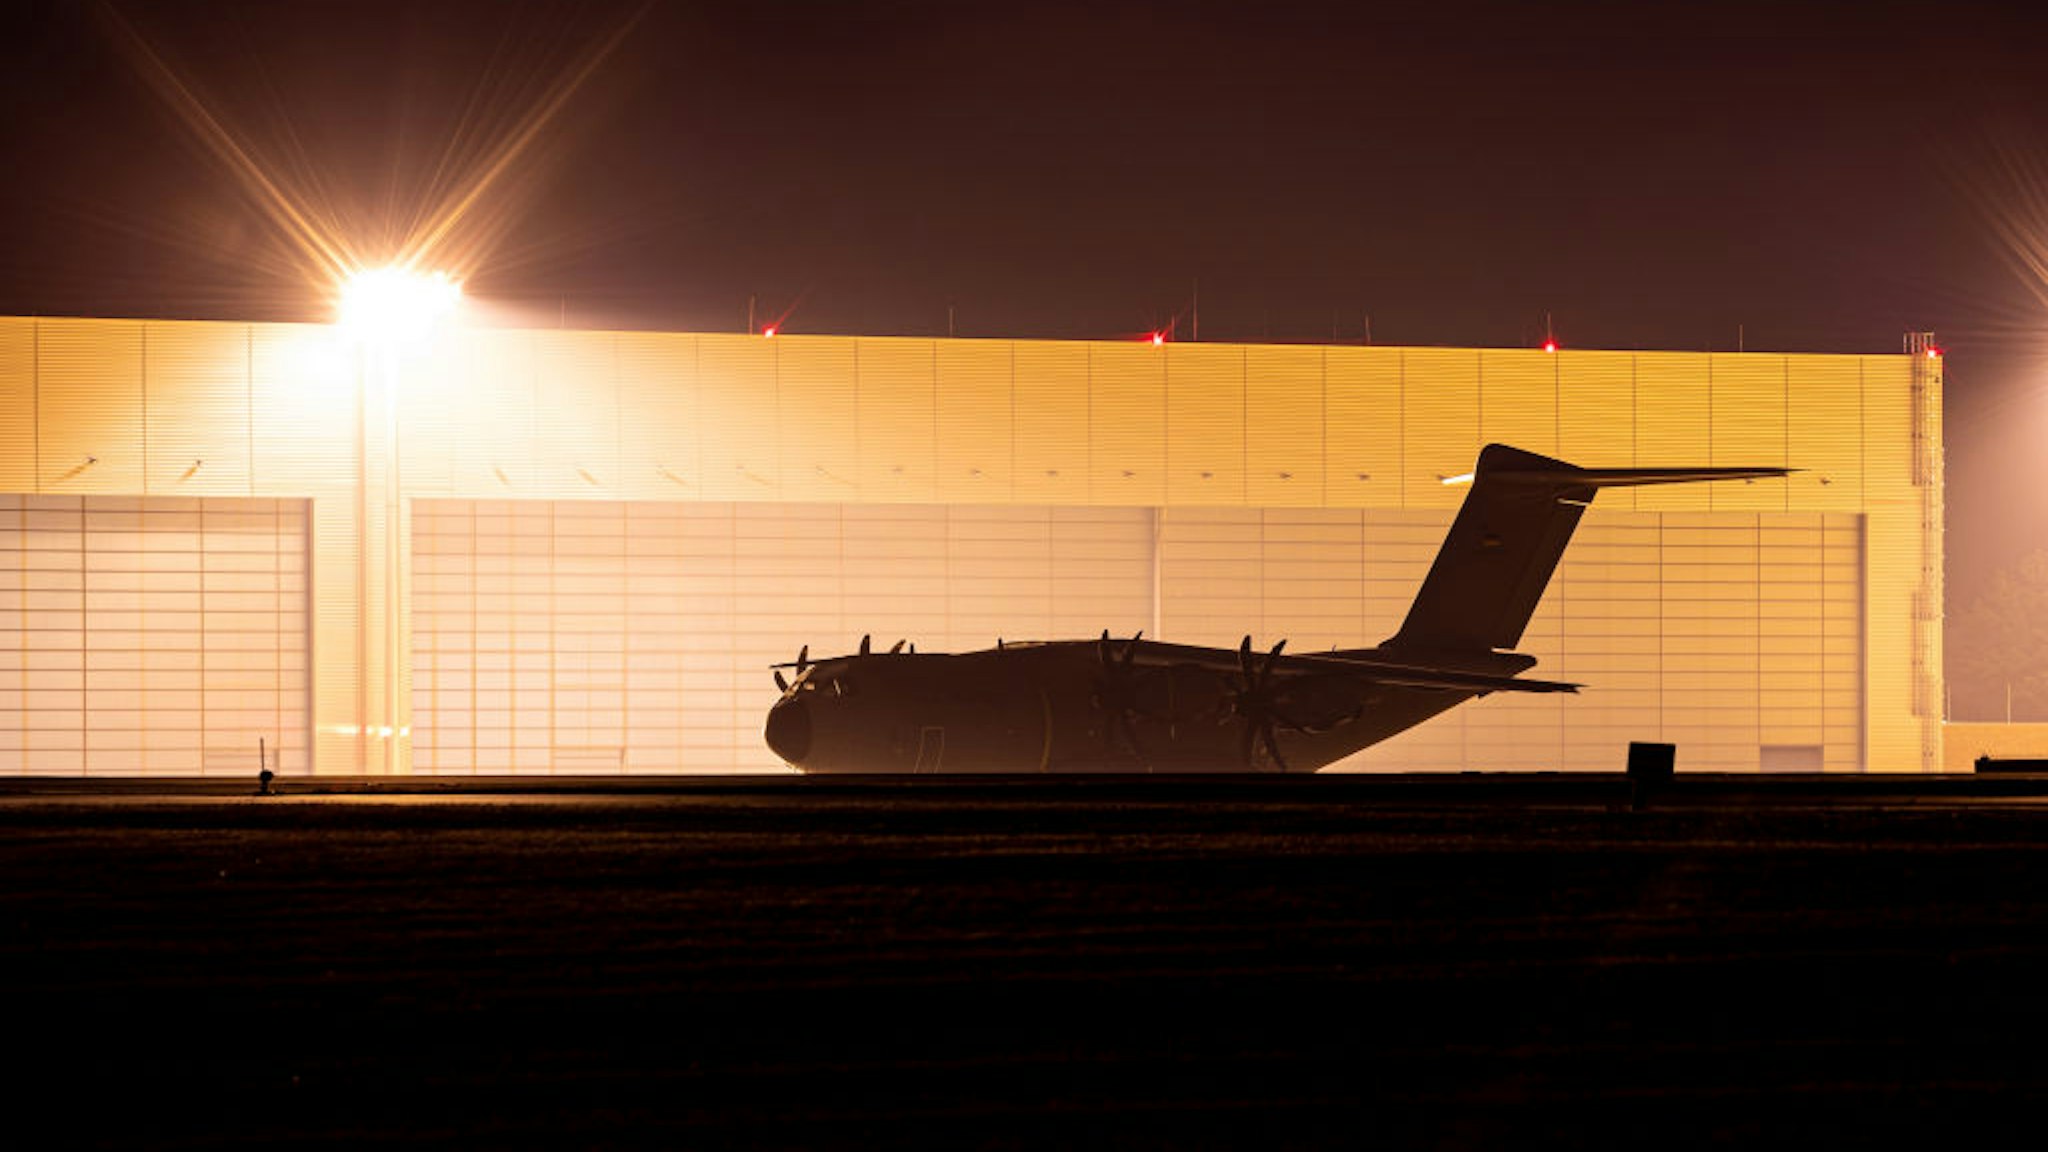 16 August 2021, Lower Saxony, Wunstorf: An Airbus A400M transport aircraft of the German Air Force stands at the Wunstorf air base in the Hanover region this evening. In view of the rapid advance of the Taliban in Afghanistan, the Bundeswehr plans to begin evacuating German citizens and local Afghan forces from Kabul on Monday (16.08.2021). Photo: Moritz Frankenberg/dpa (Photo by Moritz Frankenberg/picture alliance via Getty Images)